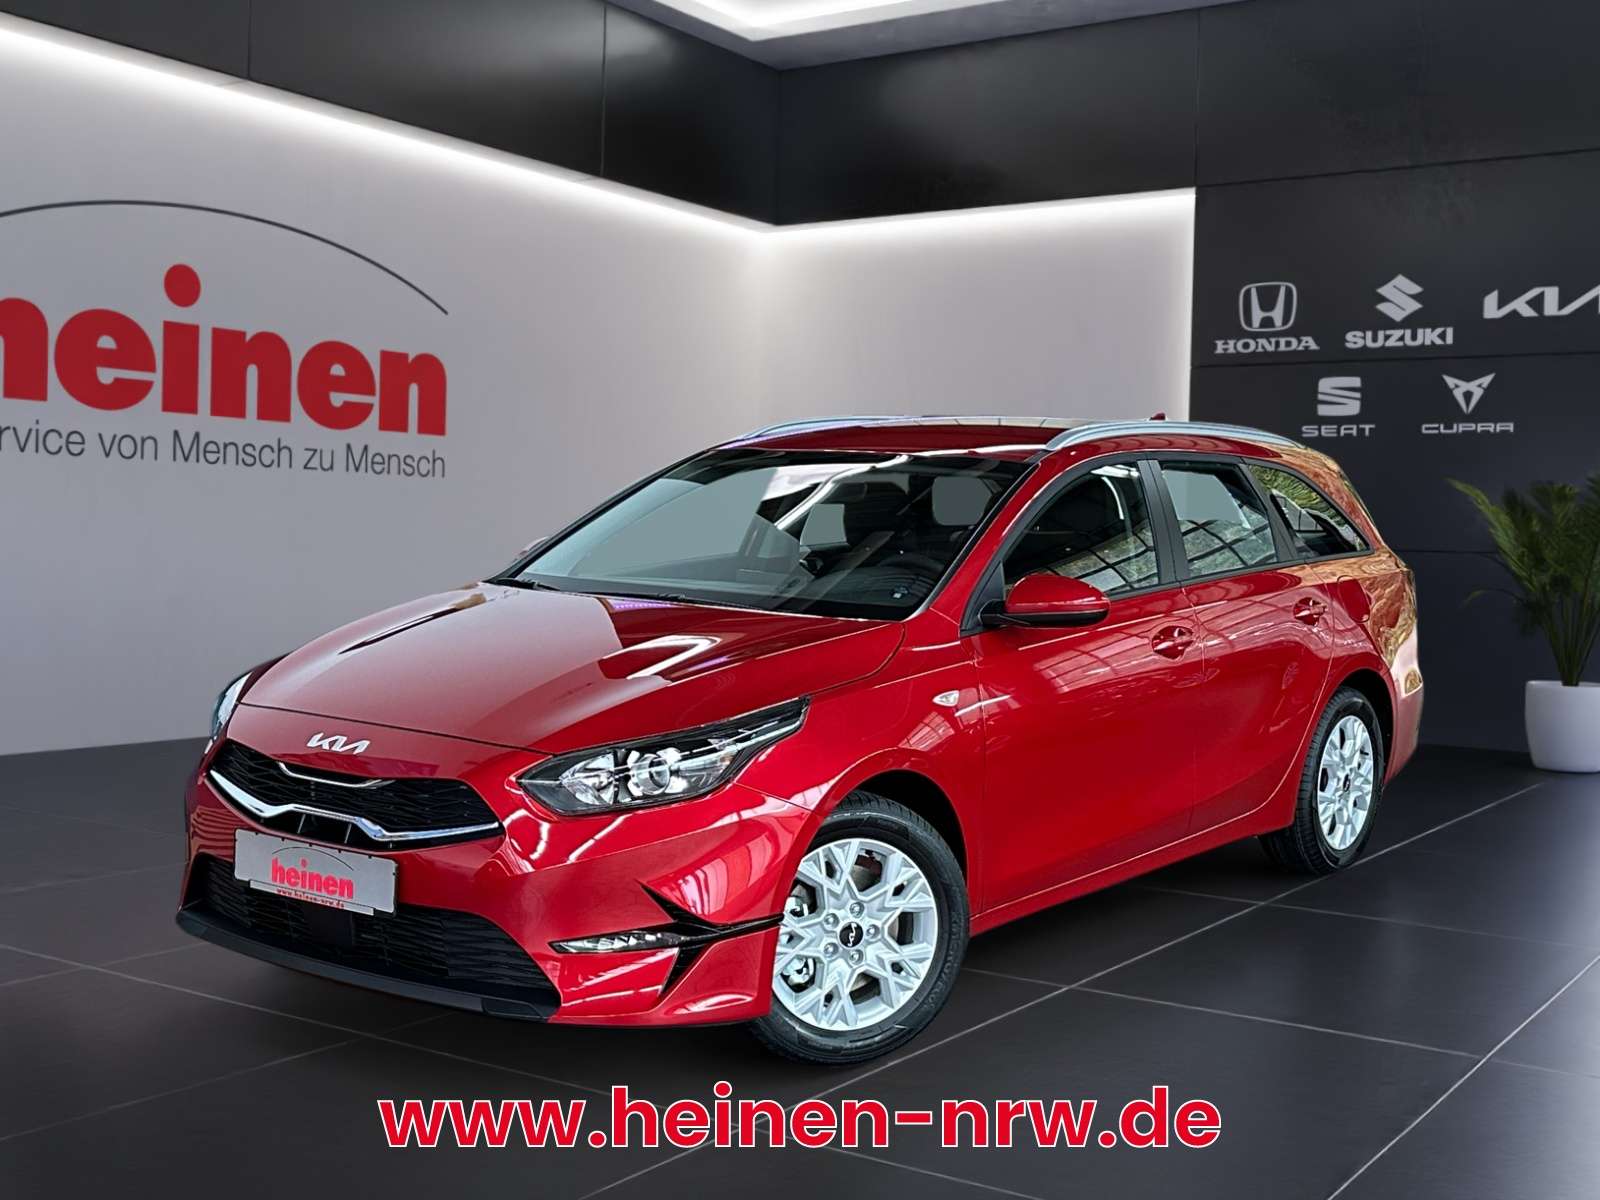 Kia Ceed SW / cee'd SW Station wagon in Red pre-registered in Essen for € 23,180.-